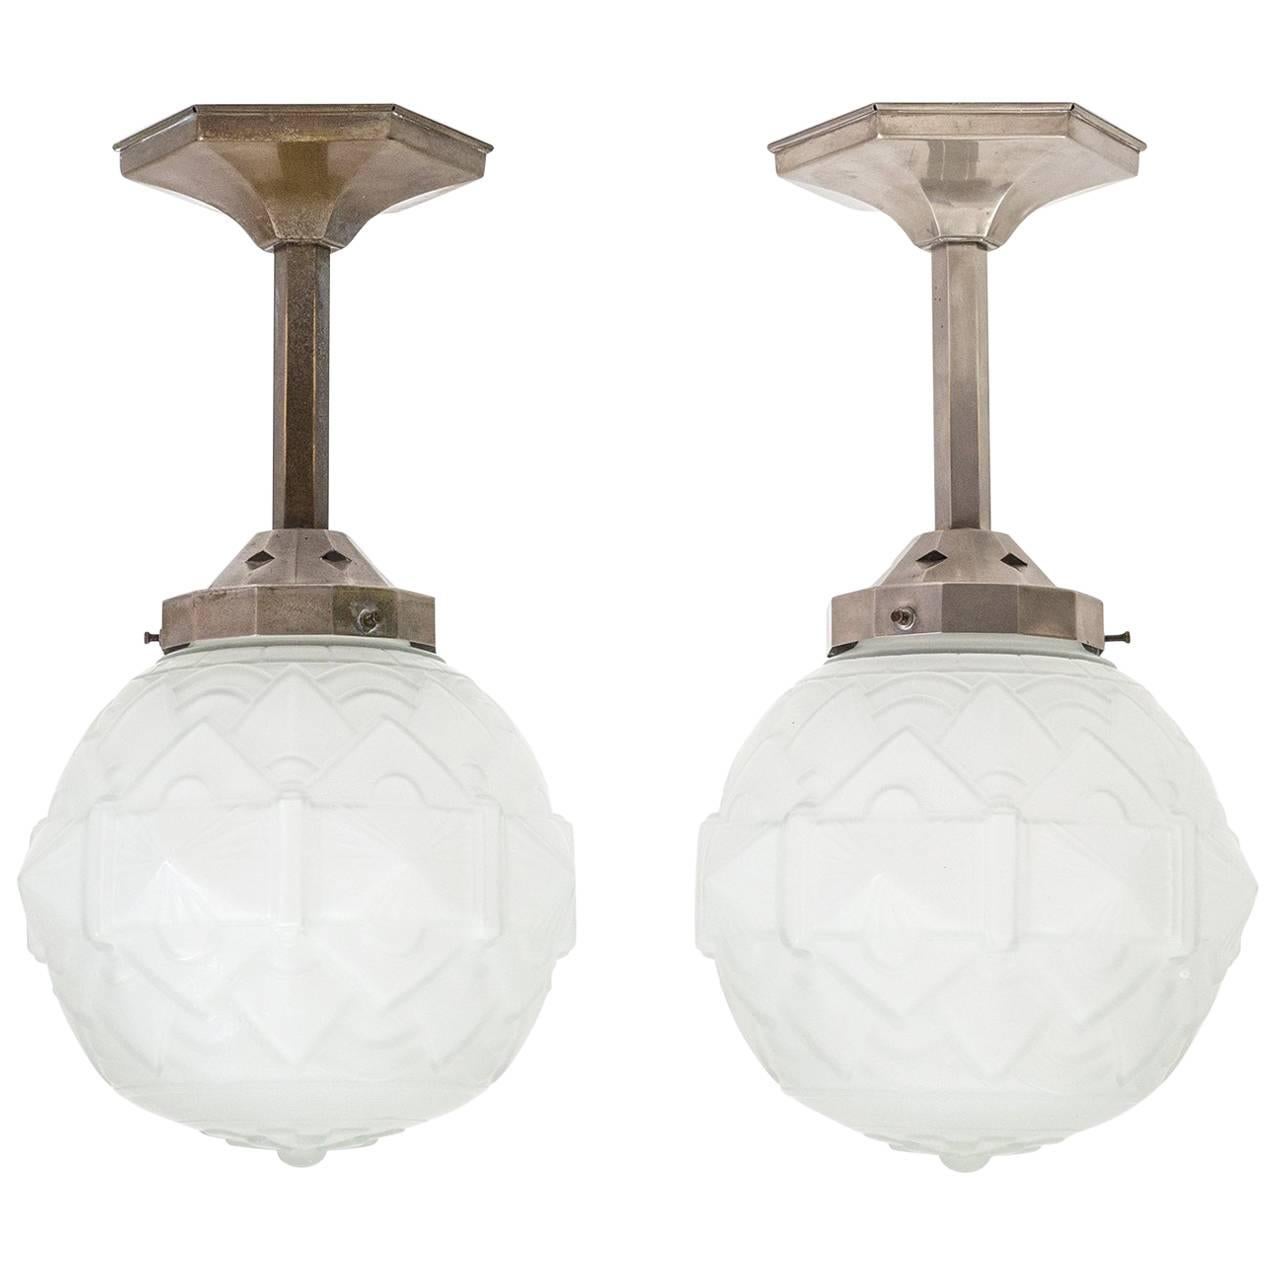 Pair of French Nickel and Satin Glass Art Deco Ceiling Lights, 1930s